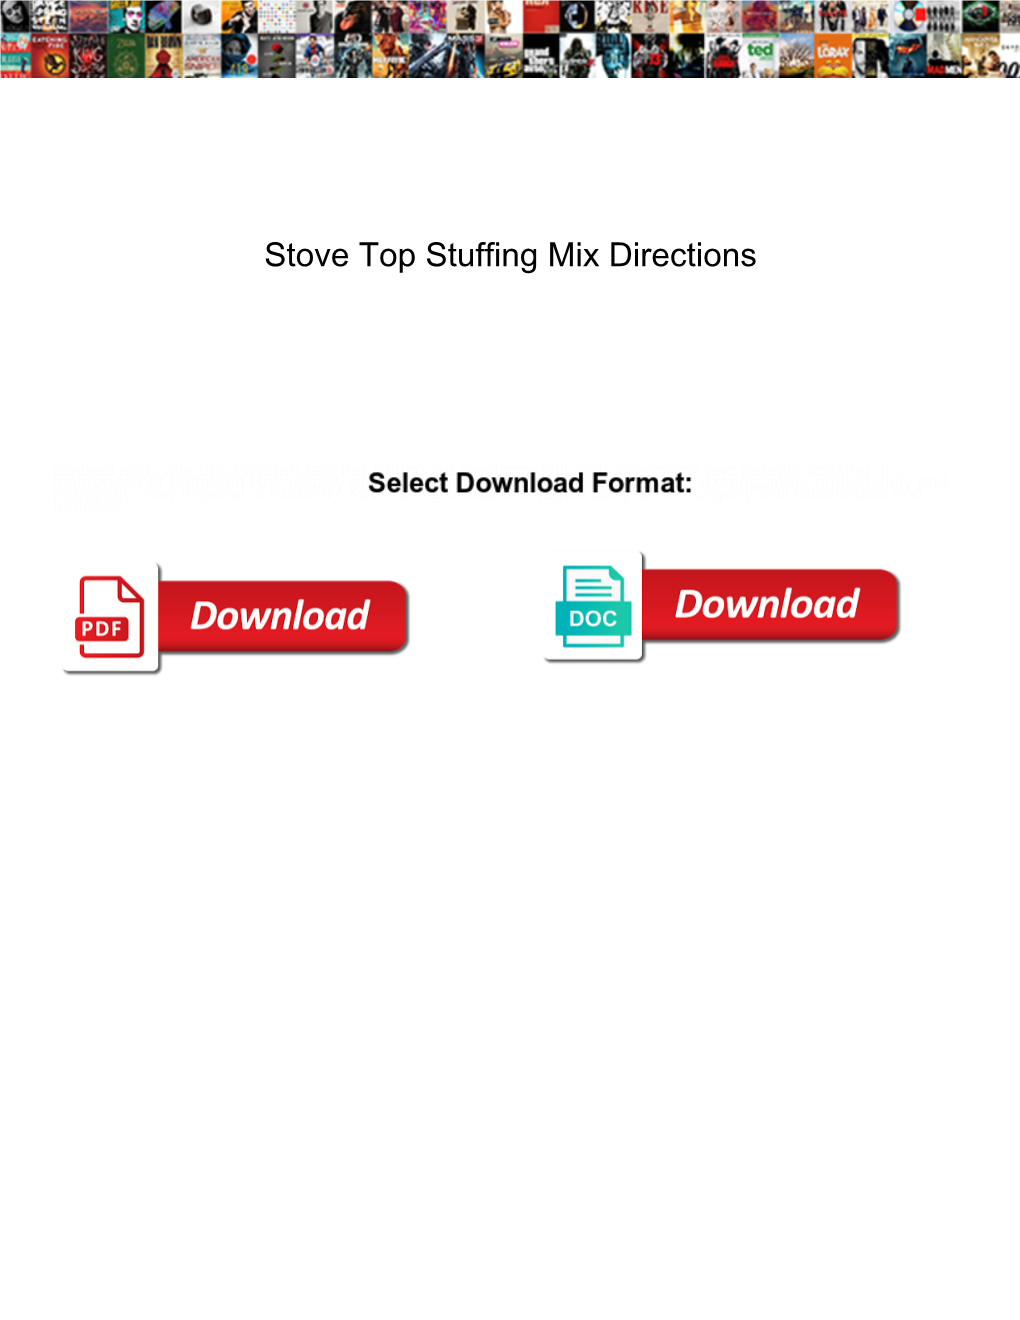 Stove Top Stuffing Mix Directions